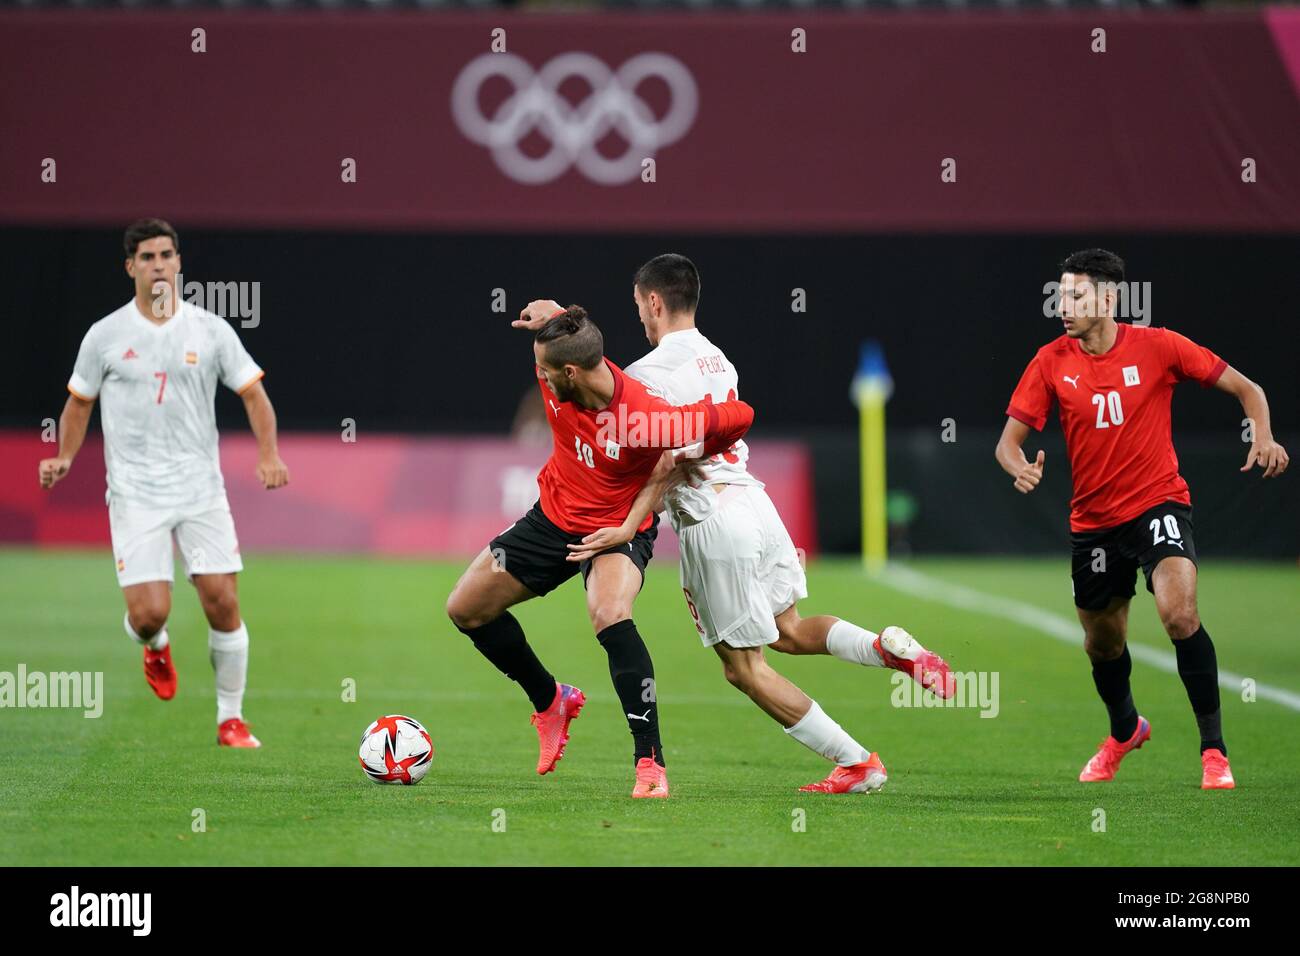 Sapporo, Japan. 22nd July, 2021. Ramadan Sobhi (10 Egypt) and Pedri Gonzales (16 Spain) battle for the ball (duel) during the Men's Olympic Football Tournament Tokyo 2020 match between Egypt and Spain at Sapporo Dome in Sapporo, Japan. Credit: SPP Sport Press Photo. /Alamy Live News Stock Photo